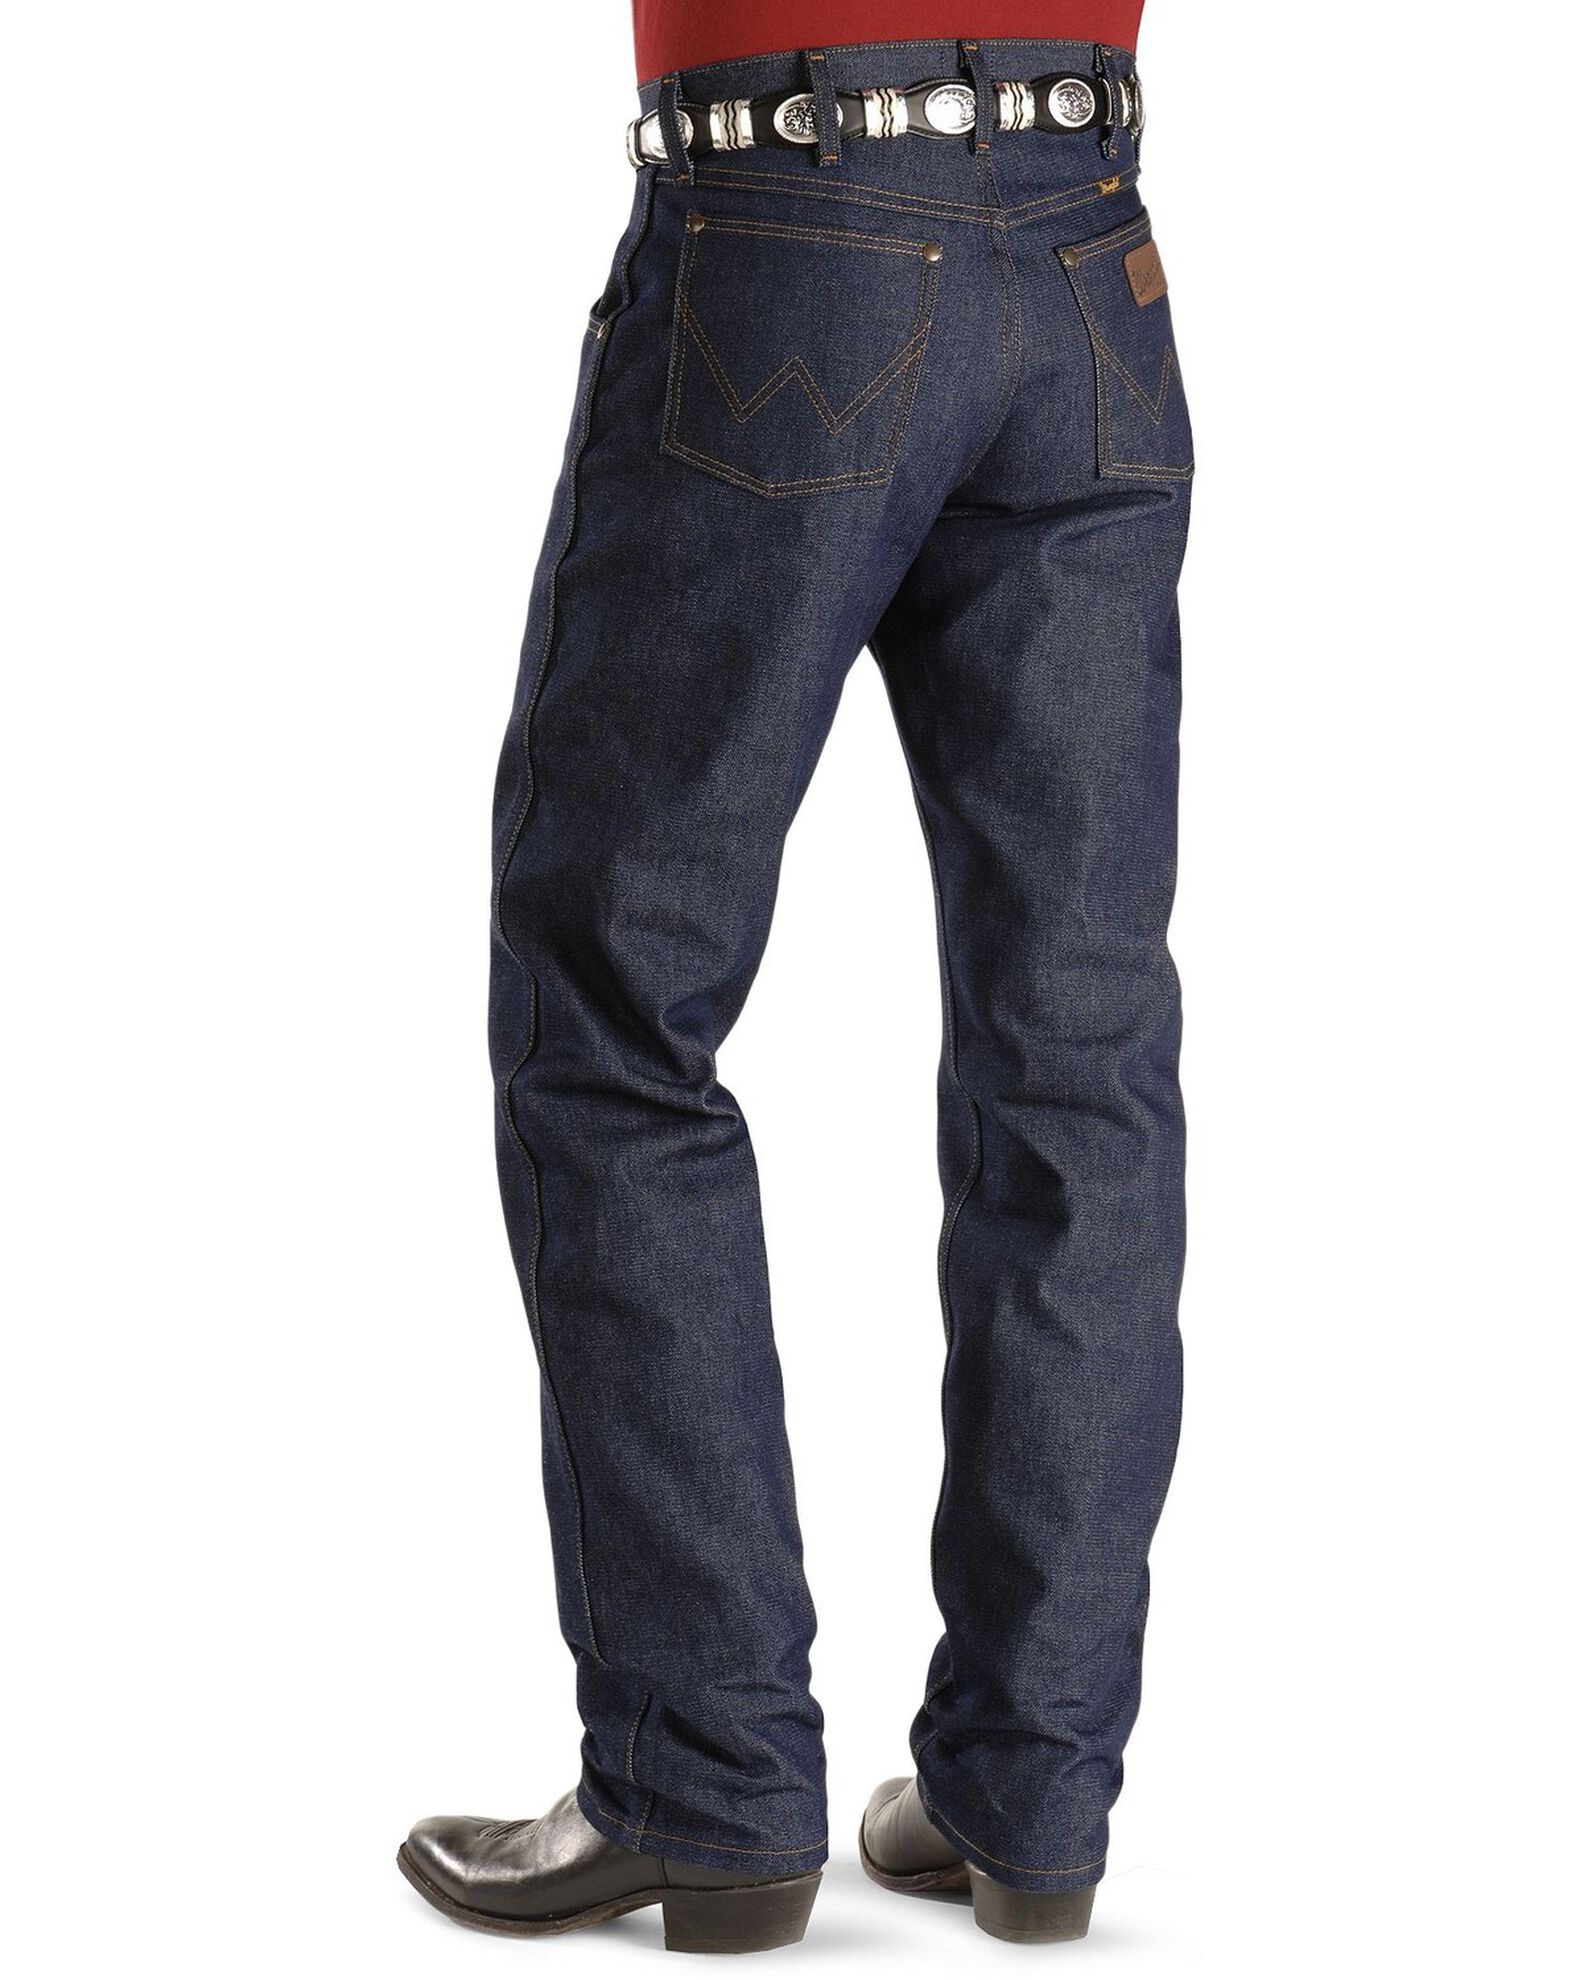 Wrangler 47MWZ Premium Performance Cowboy Cut Rigid Regular Fit Jeans -  Country Outfitter